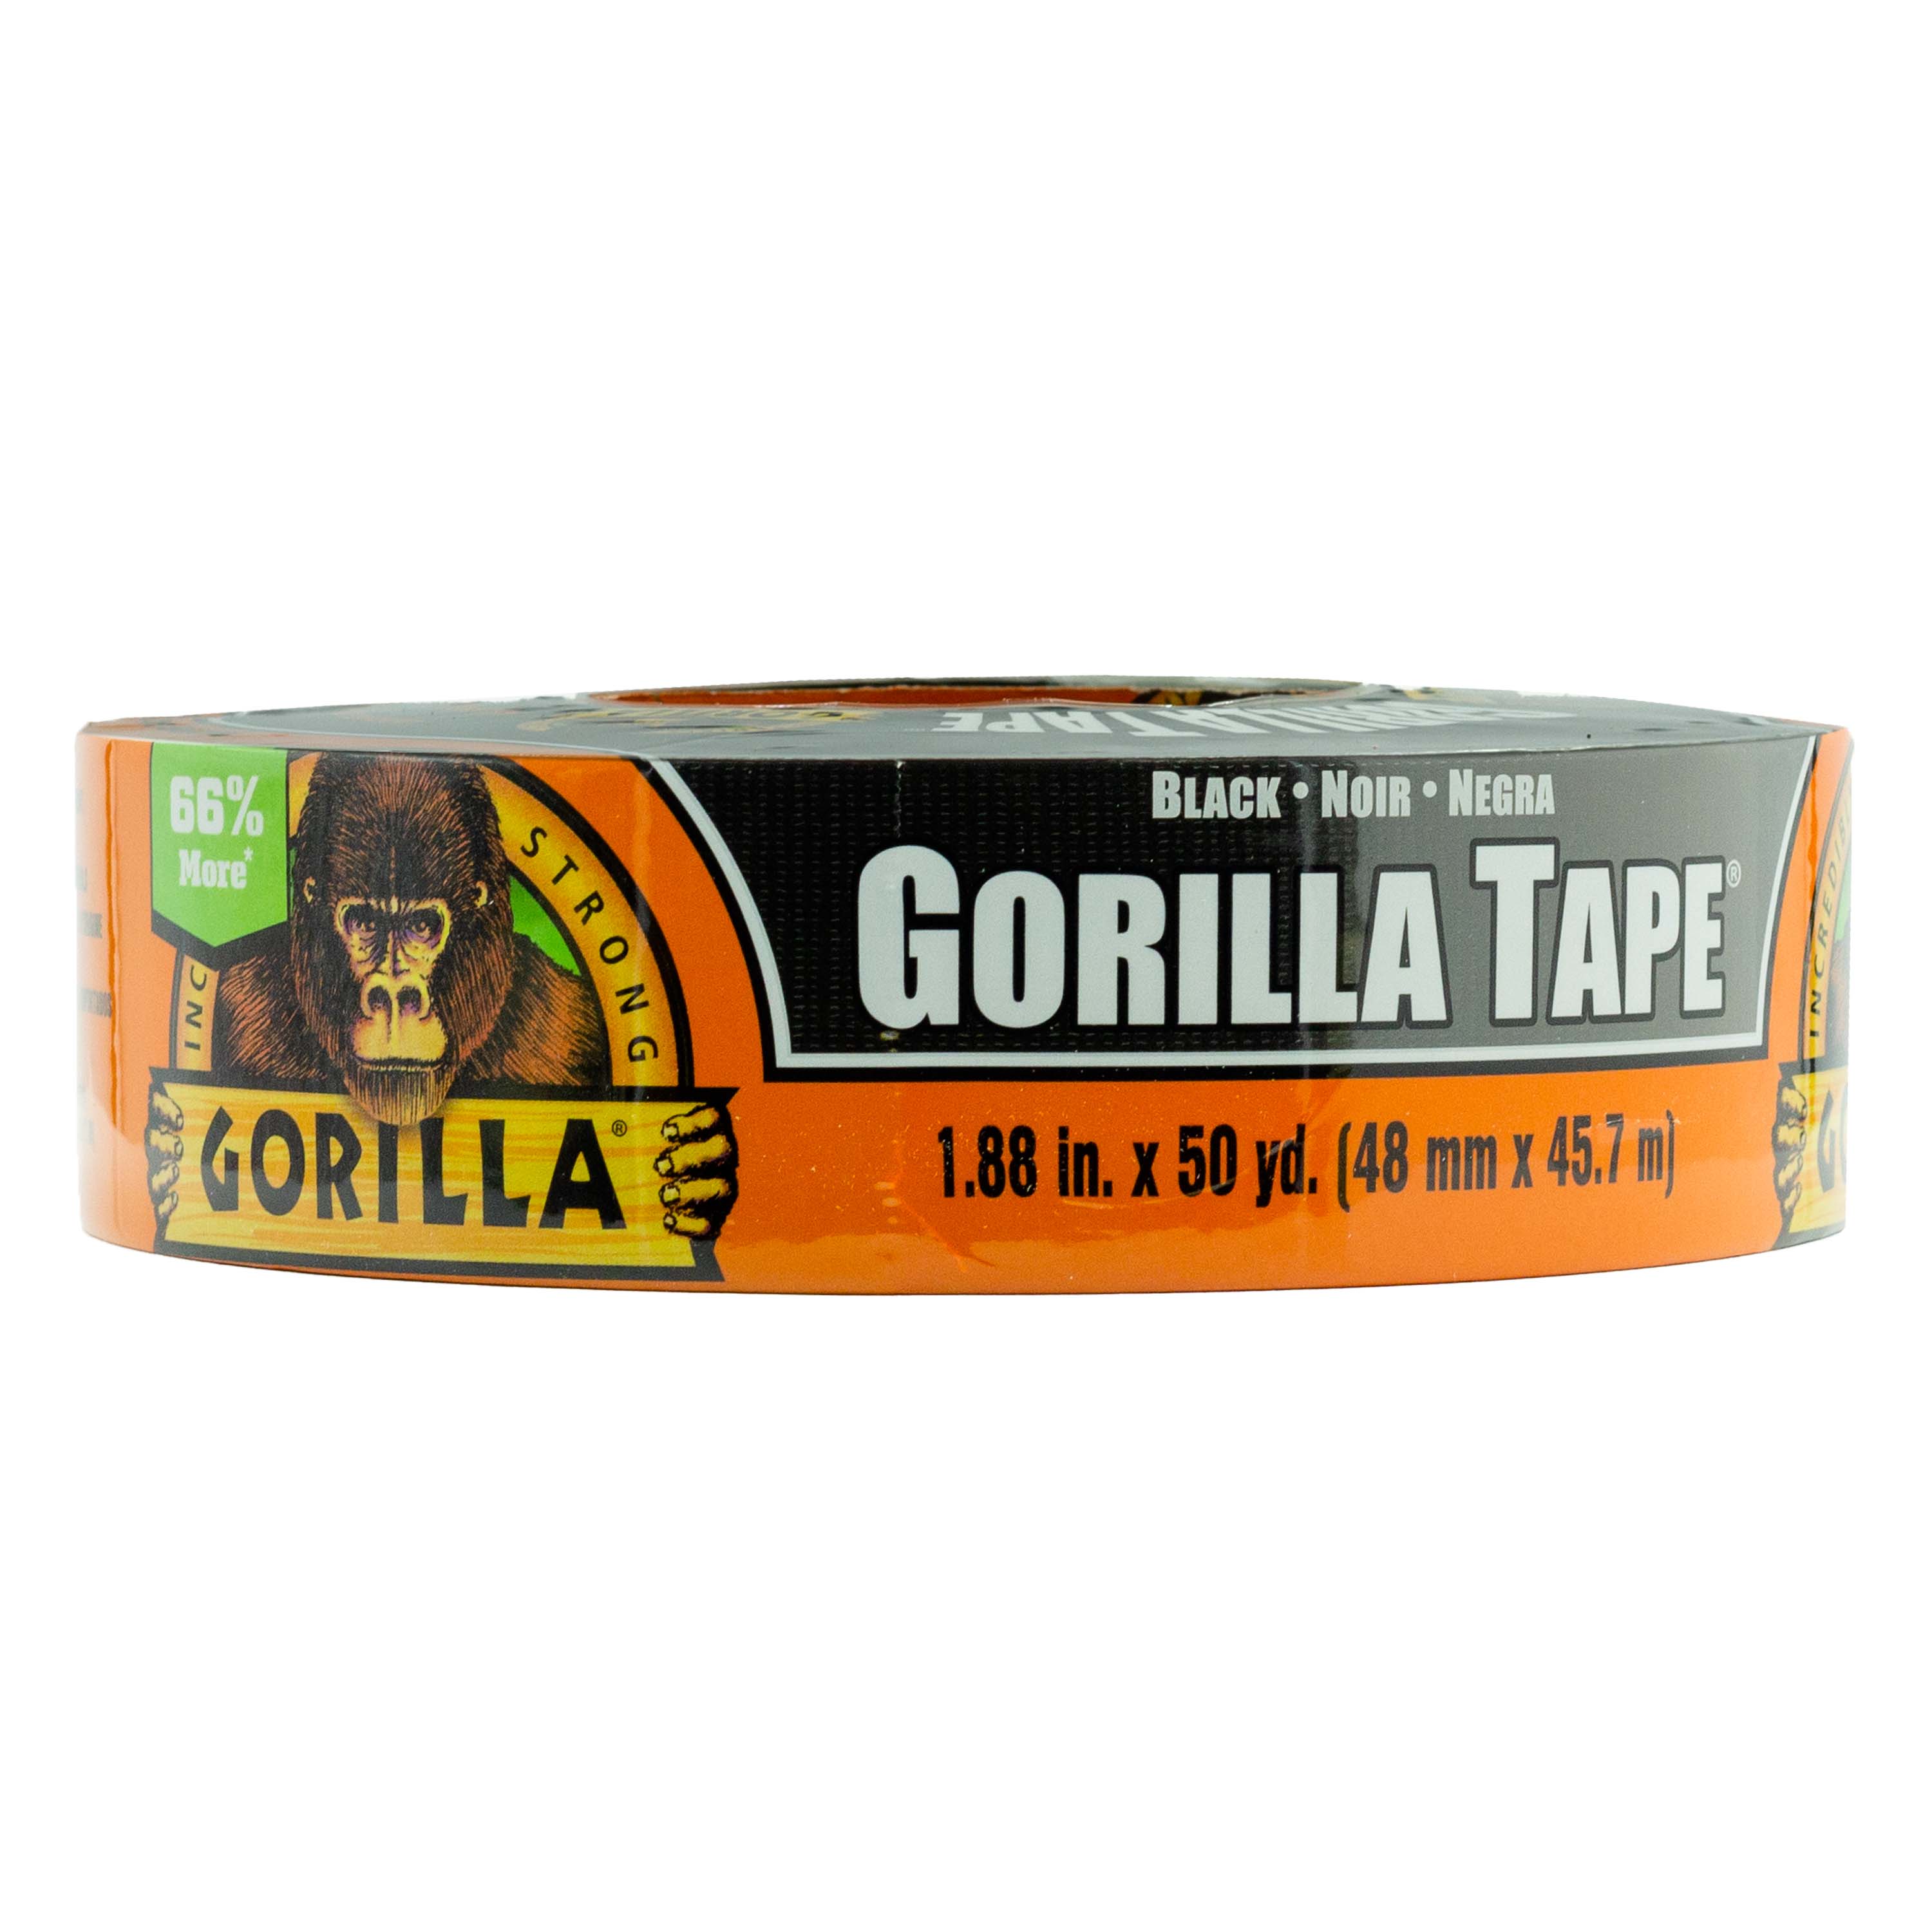 Gorilla Tough and Wide Tape 2.8 in x 25 yd Black, 2 Pack 